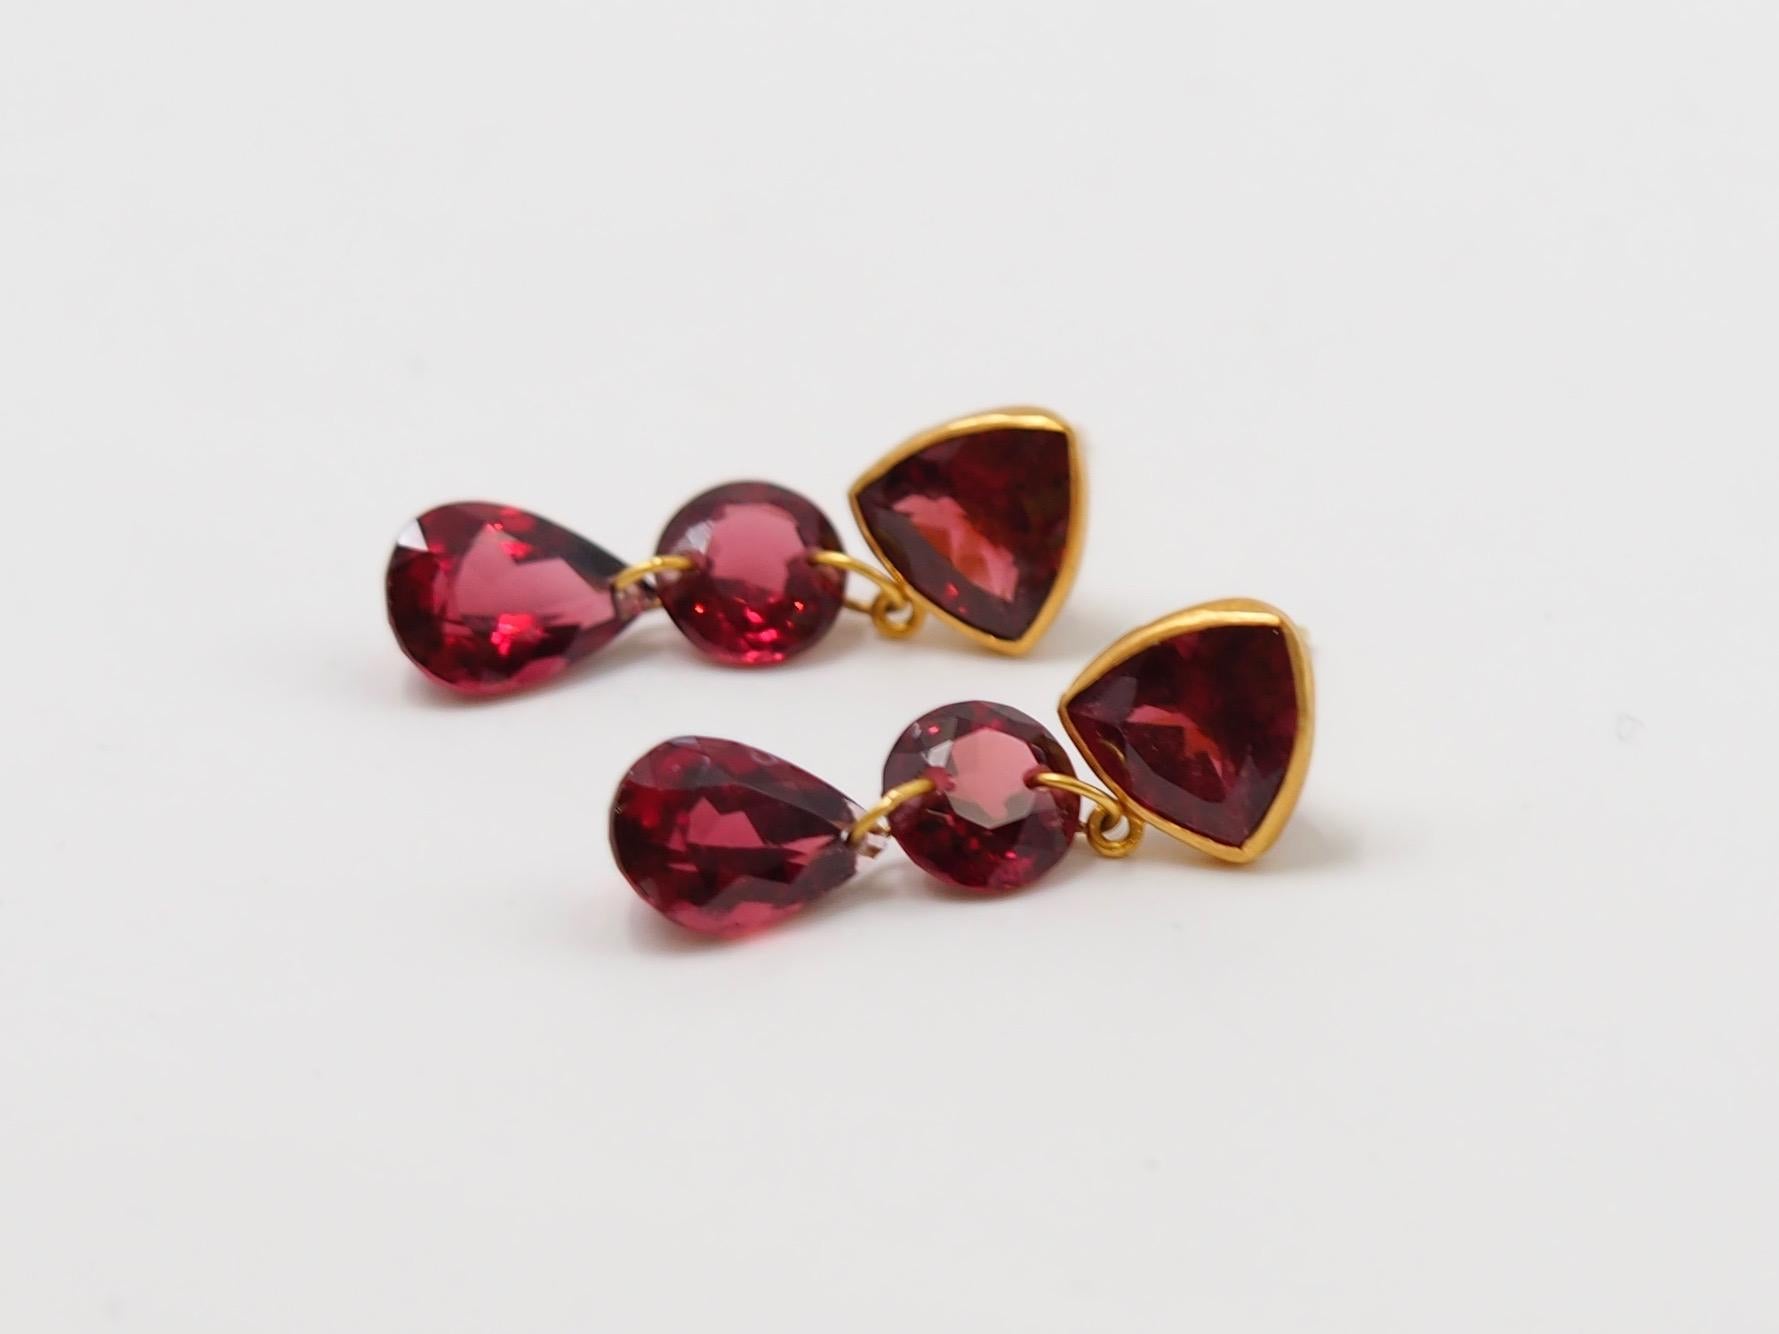 These earrings are composed of 6 purple / red garnets for a total weight of 16.7carats. 
The top part of the earrings presents a trillion shape garnet set in 22 karat gold linked to a round shape garnet (simple drilled) which leads to a pear shape